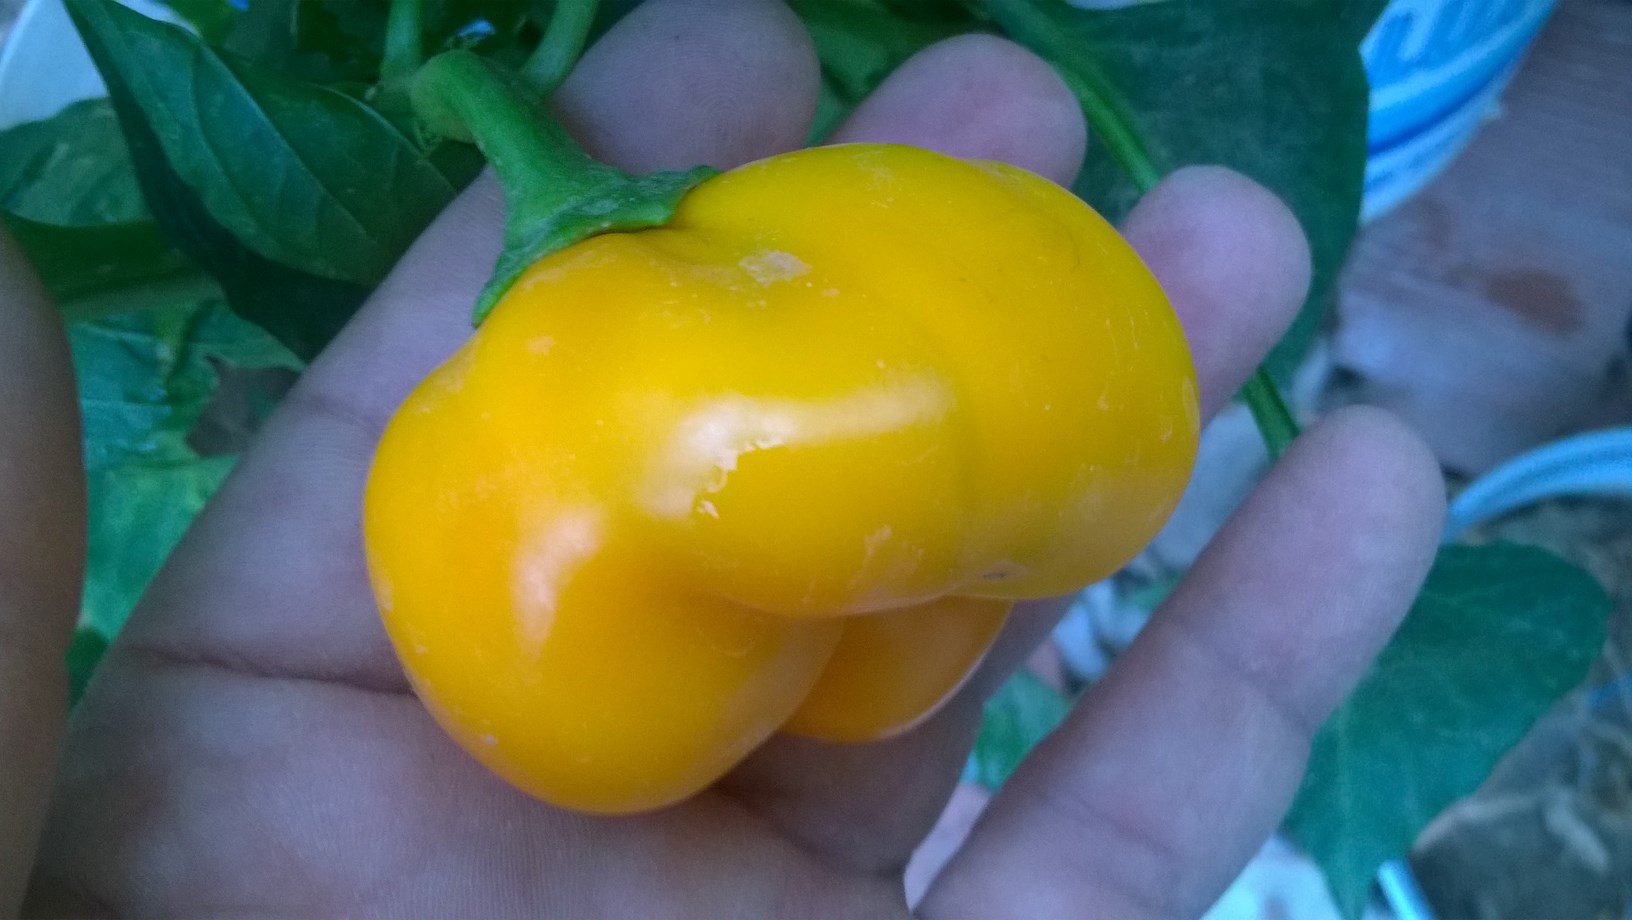 There's all so "mini bell peppers." Like their name suggests, these bell peppers are only about 1/3rd the size of a typical bell pepper. Mini bell peppers are not simply "small" bell peppers but unique varieties that can be challenging to grow at present due to their lesser disease resistance.